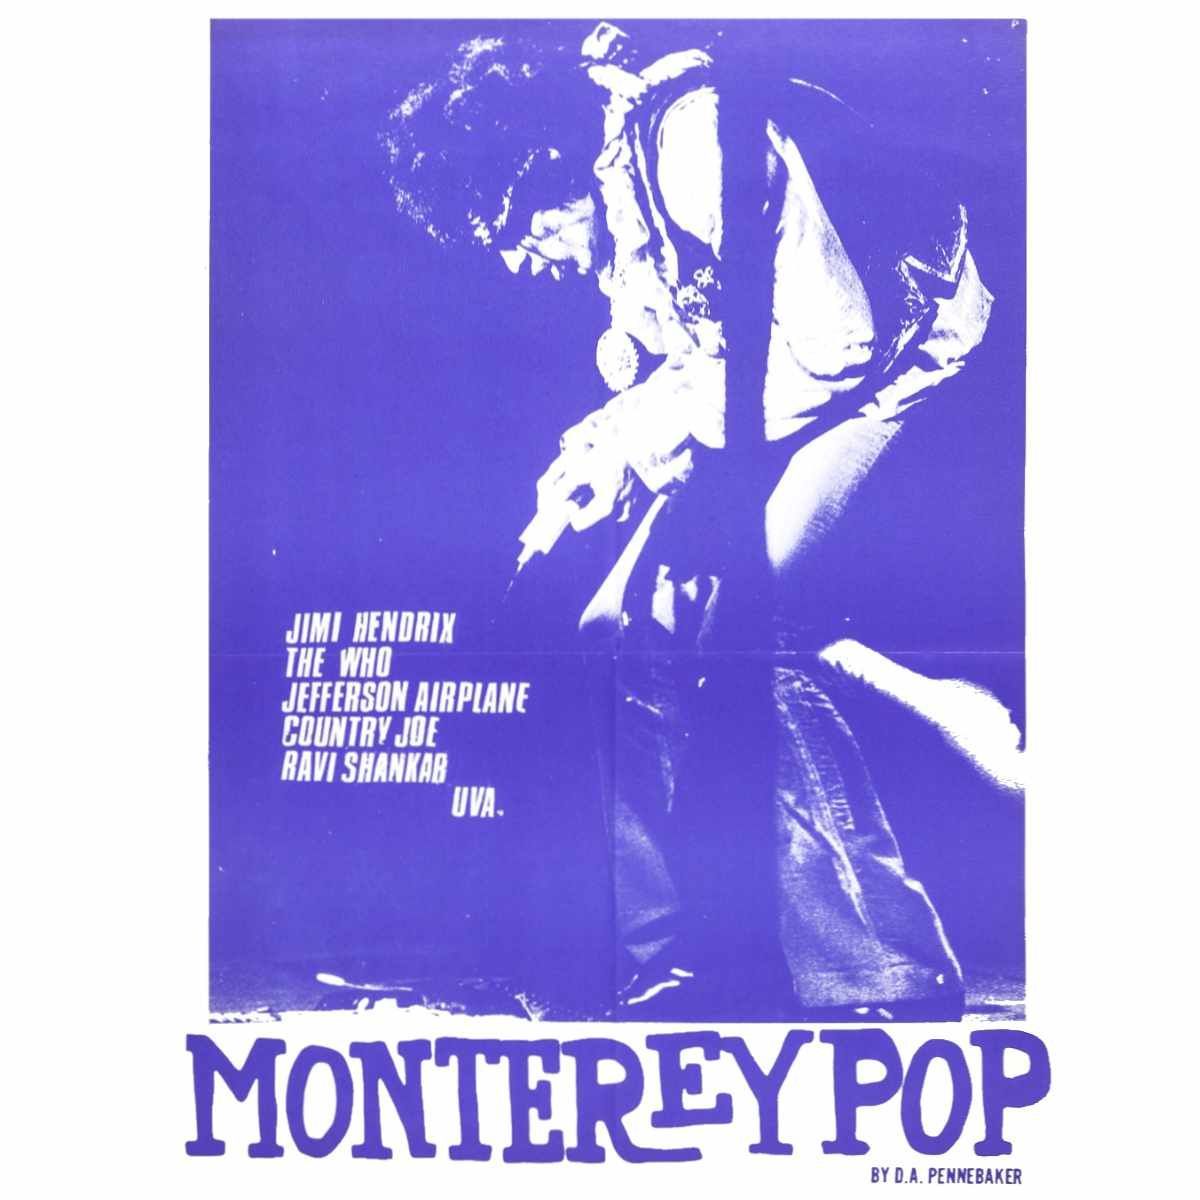 Hendrix! The Who! Otis Redding! Janis Joplin & More! Our final showing of D.A. Pennebaker's classic concert film MONTEREY POP (1968) in 35mm starts tonight, Saturday May 18th, at midnight! Tickets available at the theater and online: buff.ly/3WOoHDB